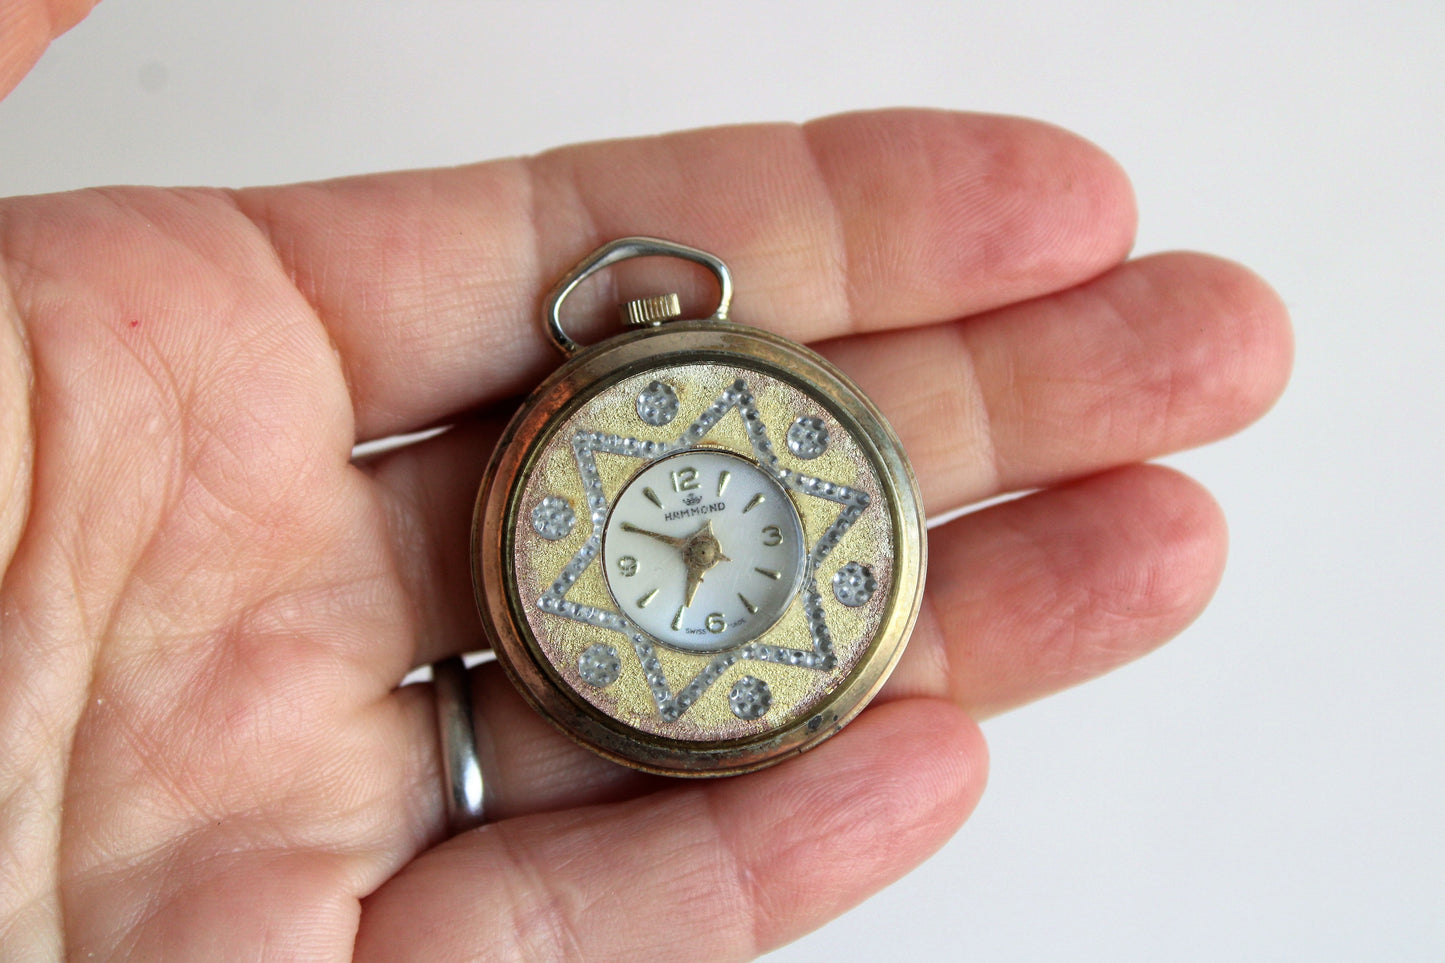 Vintage 1940s Woman's Pocket or Pendant Watch